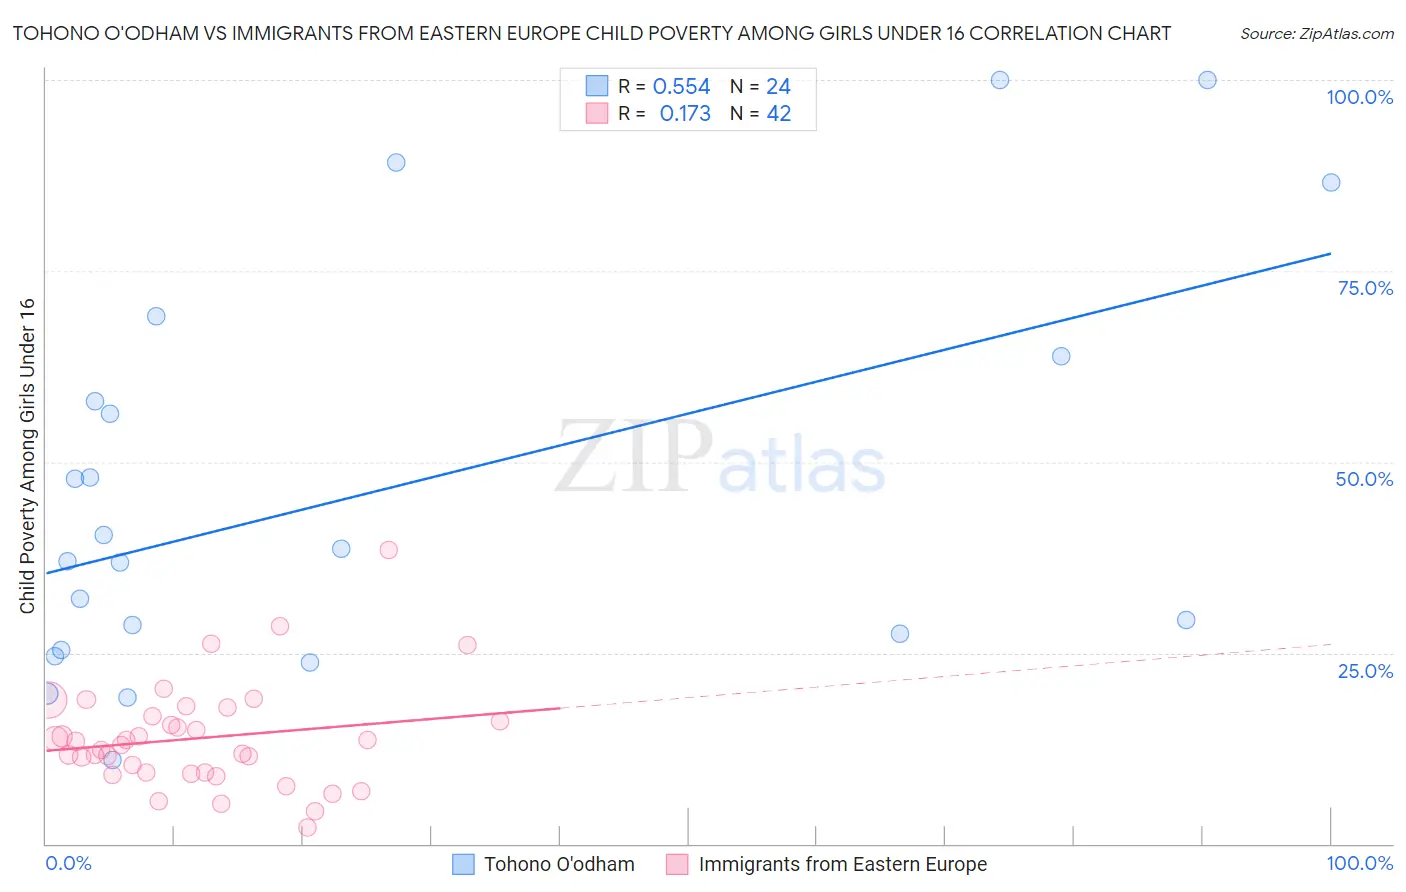 Tohono O'odham vs Immigrants from Eastern Europe Child Poverty Among Girls Under 16